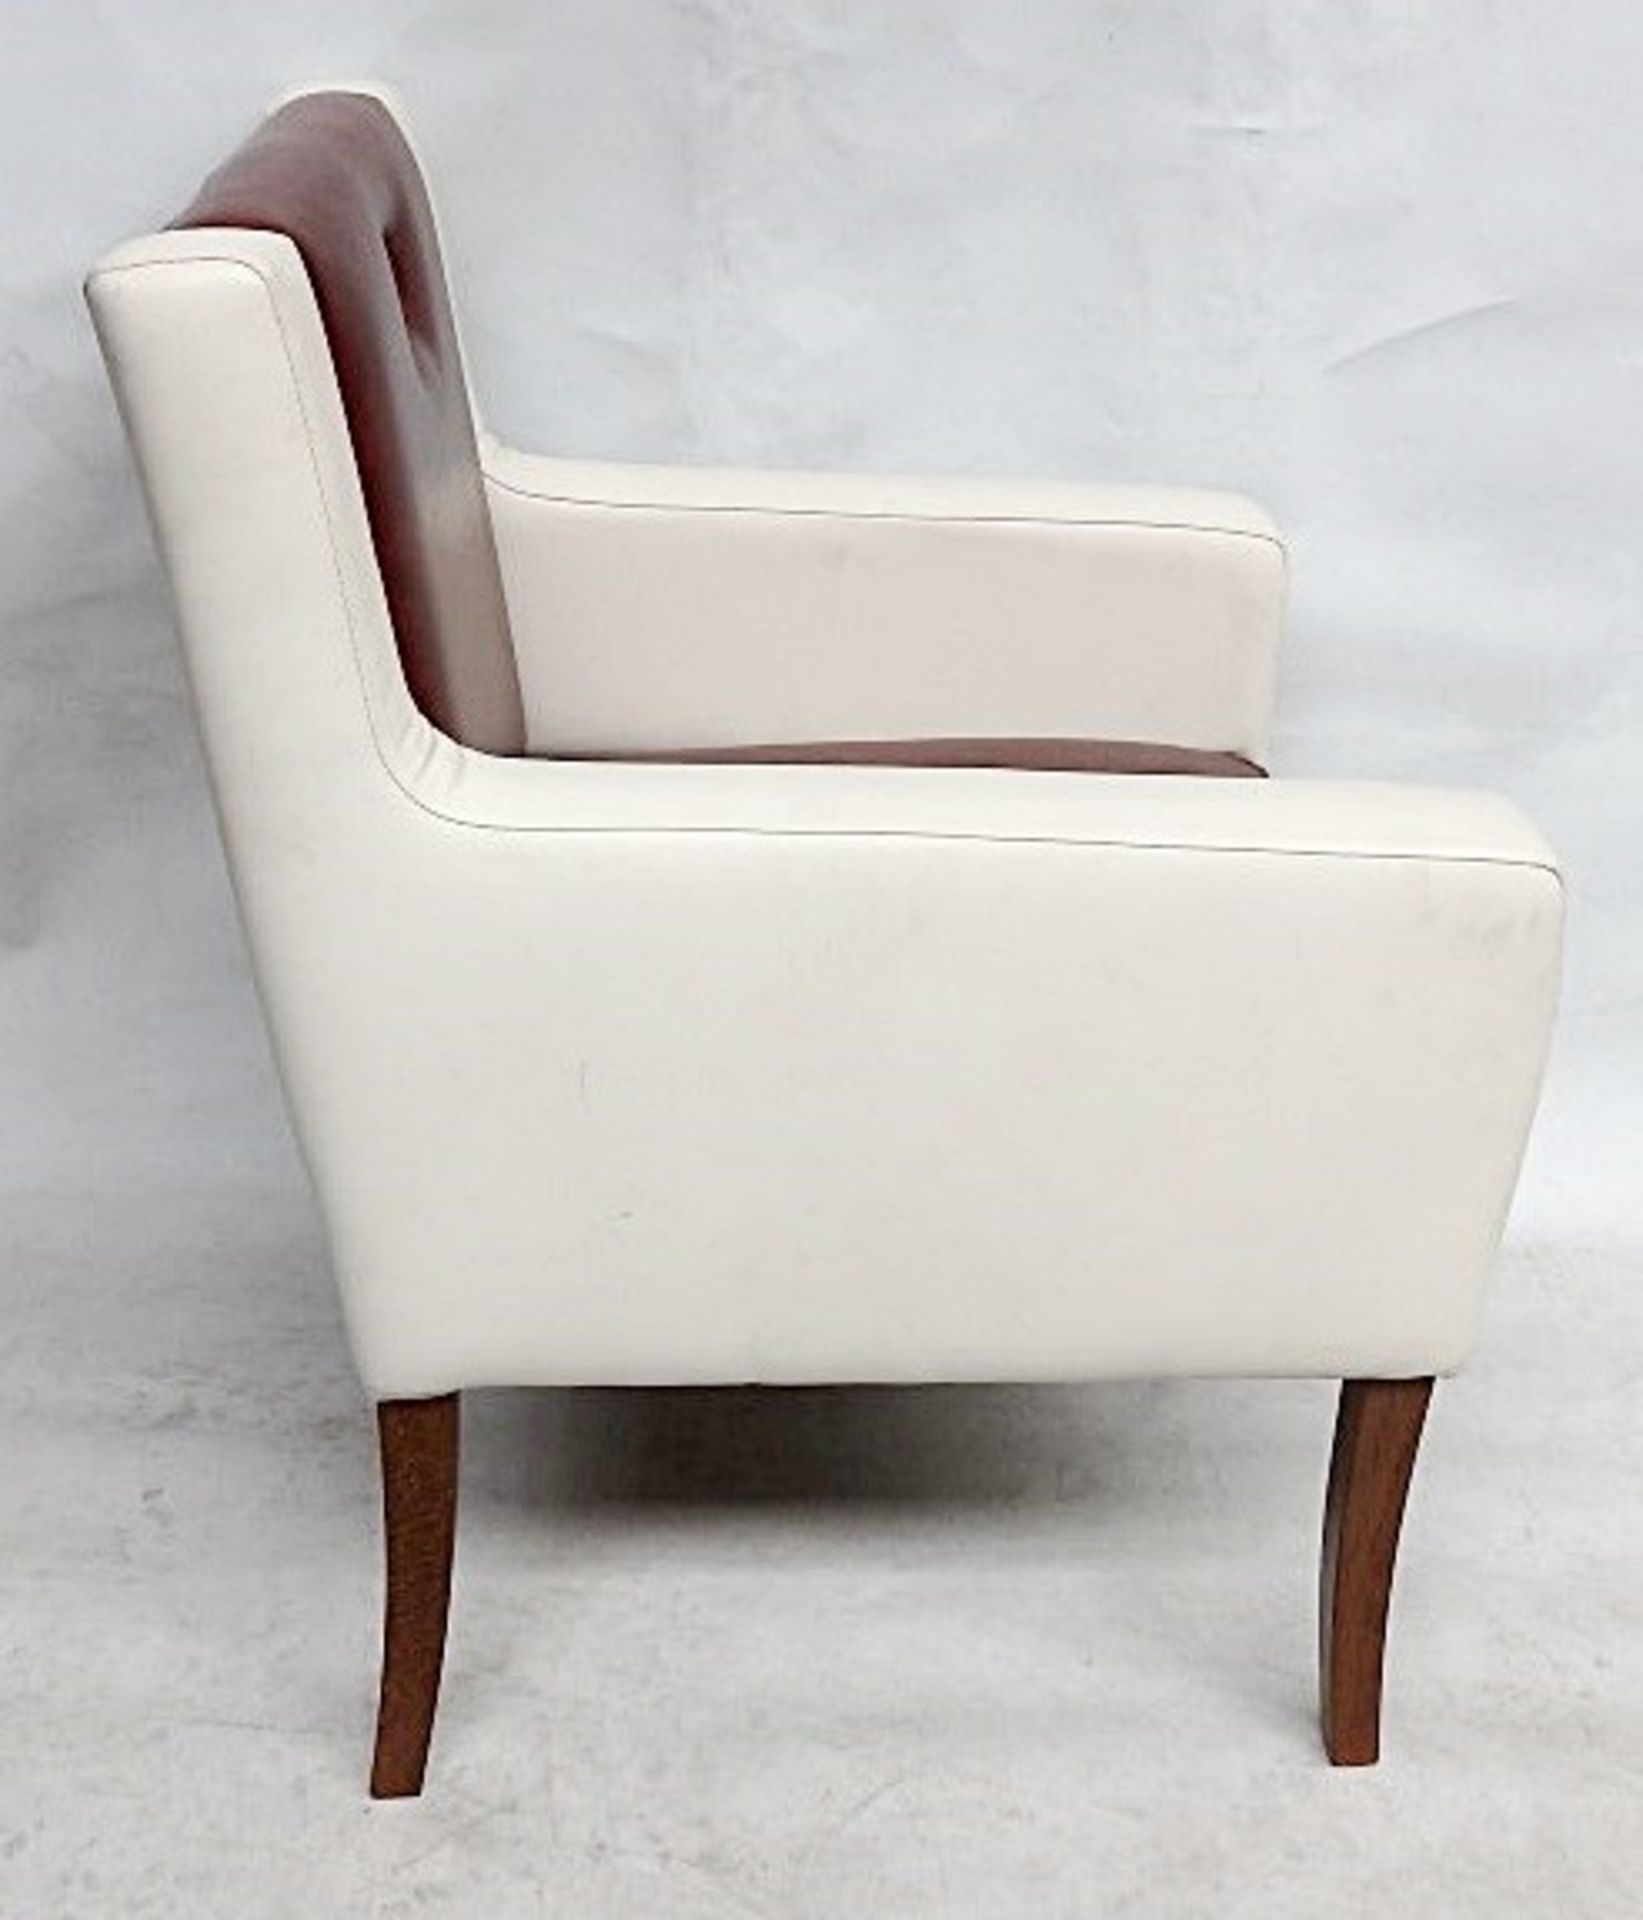 1 x Bespoke Armchair - Upholstered In Cream & Tan Leathers - Handcrafted & Upholstered By British - Image 8 of 8